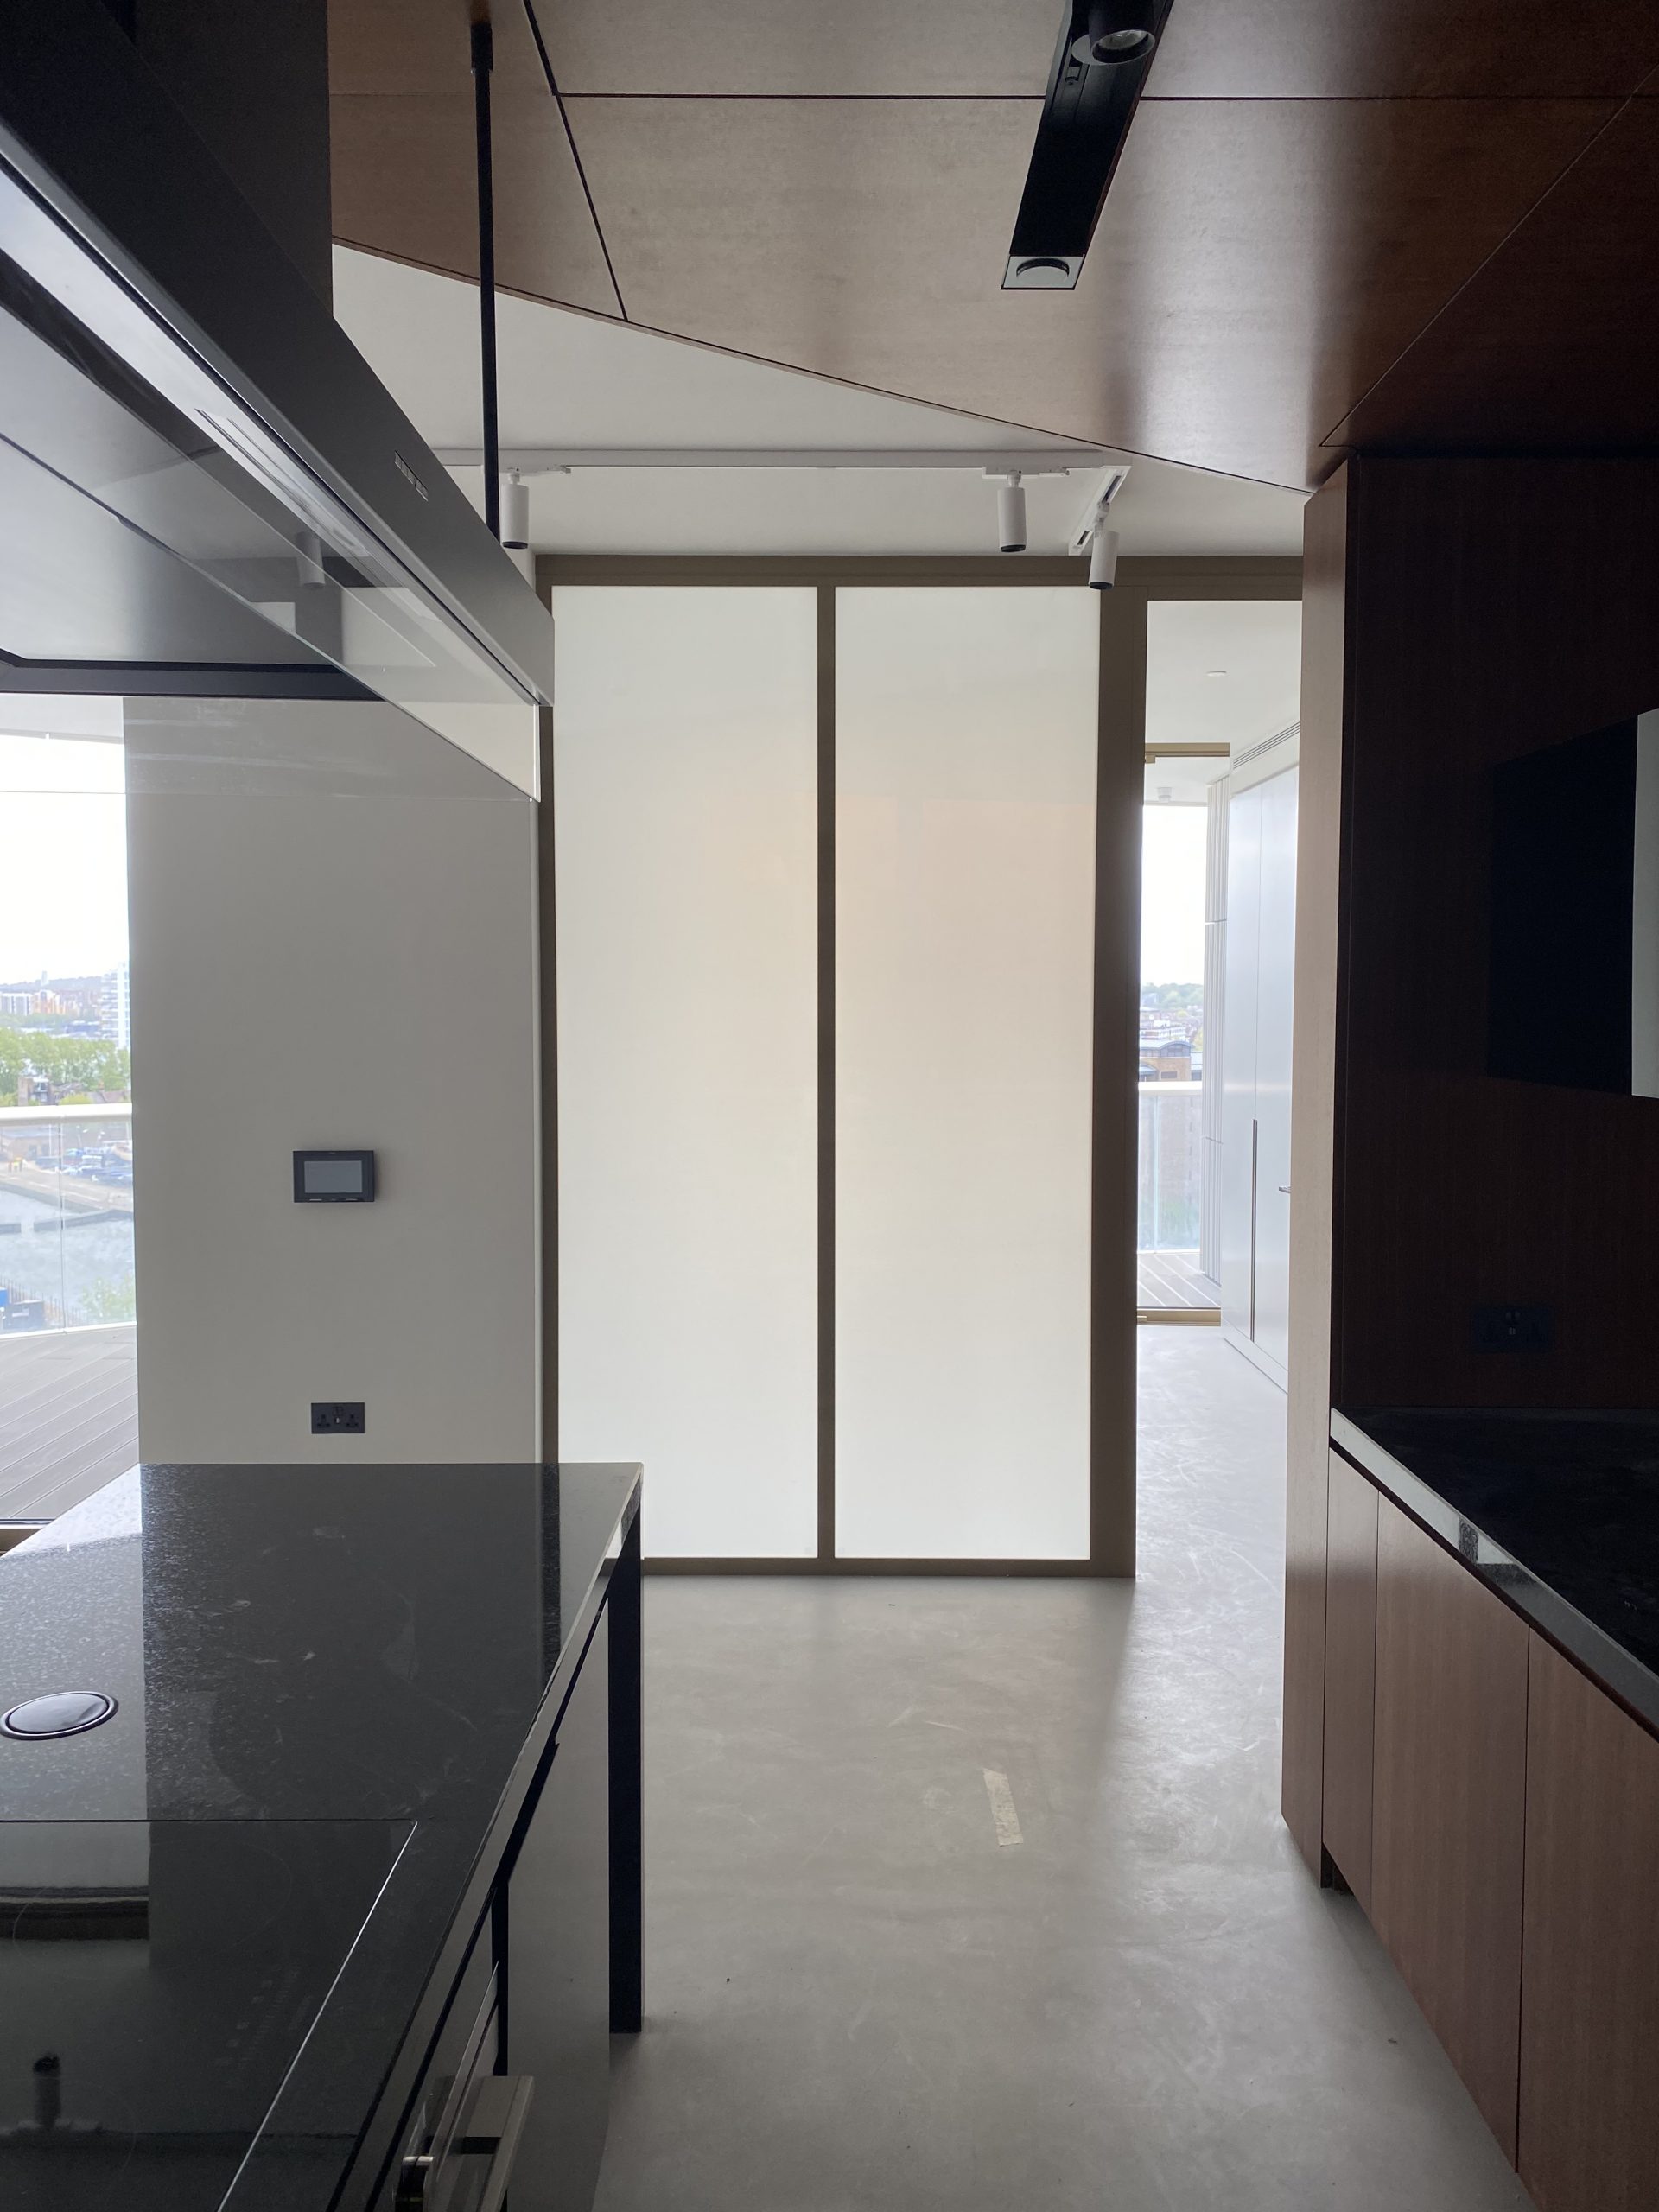 Privacy smart glass panels provide easy privacy when required, letting in light when preferred